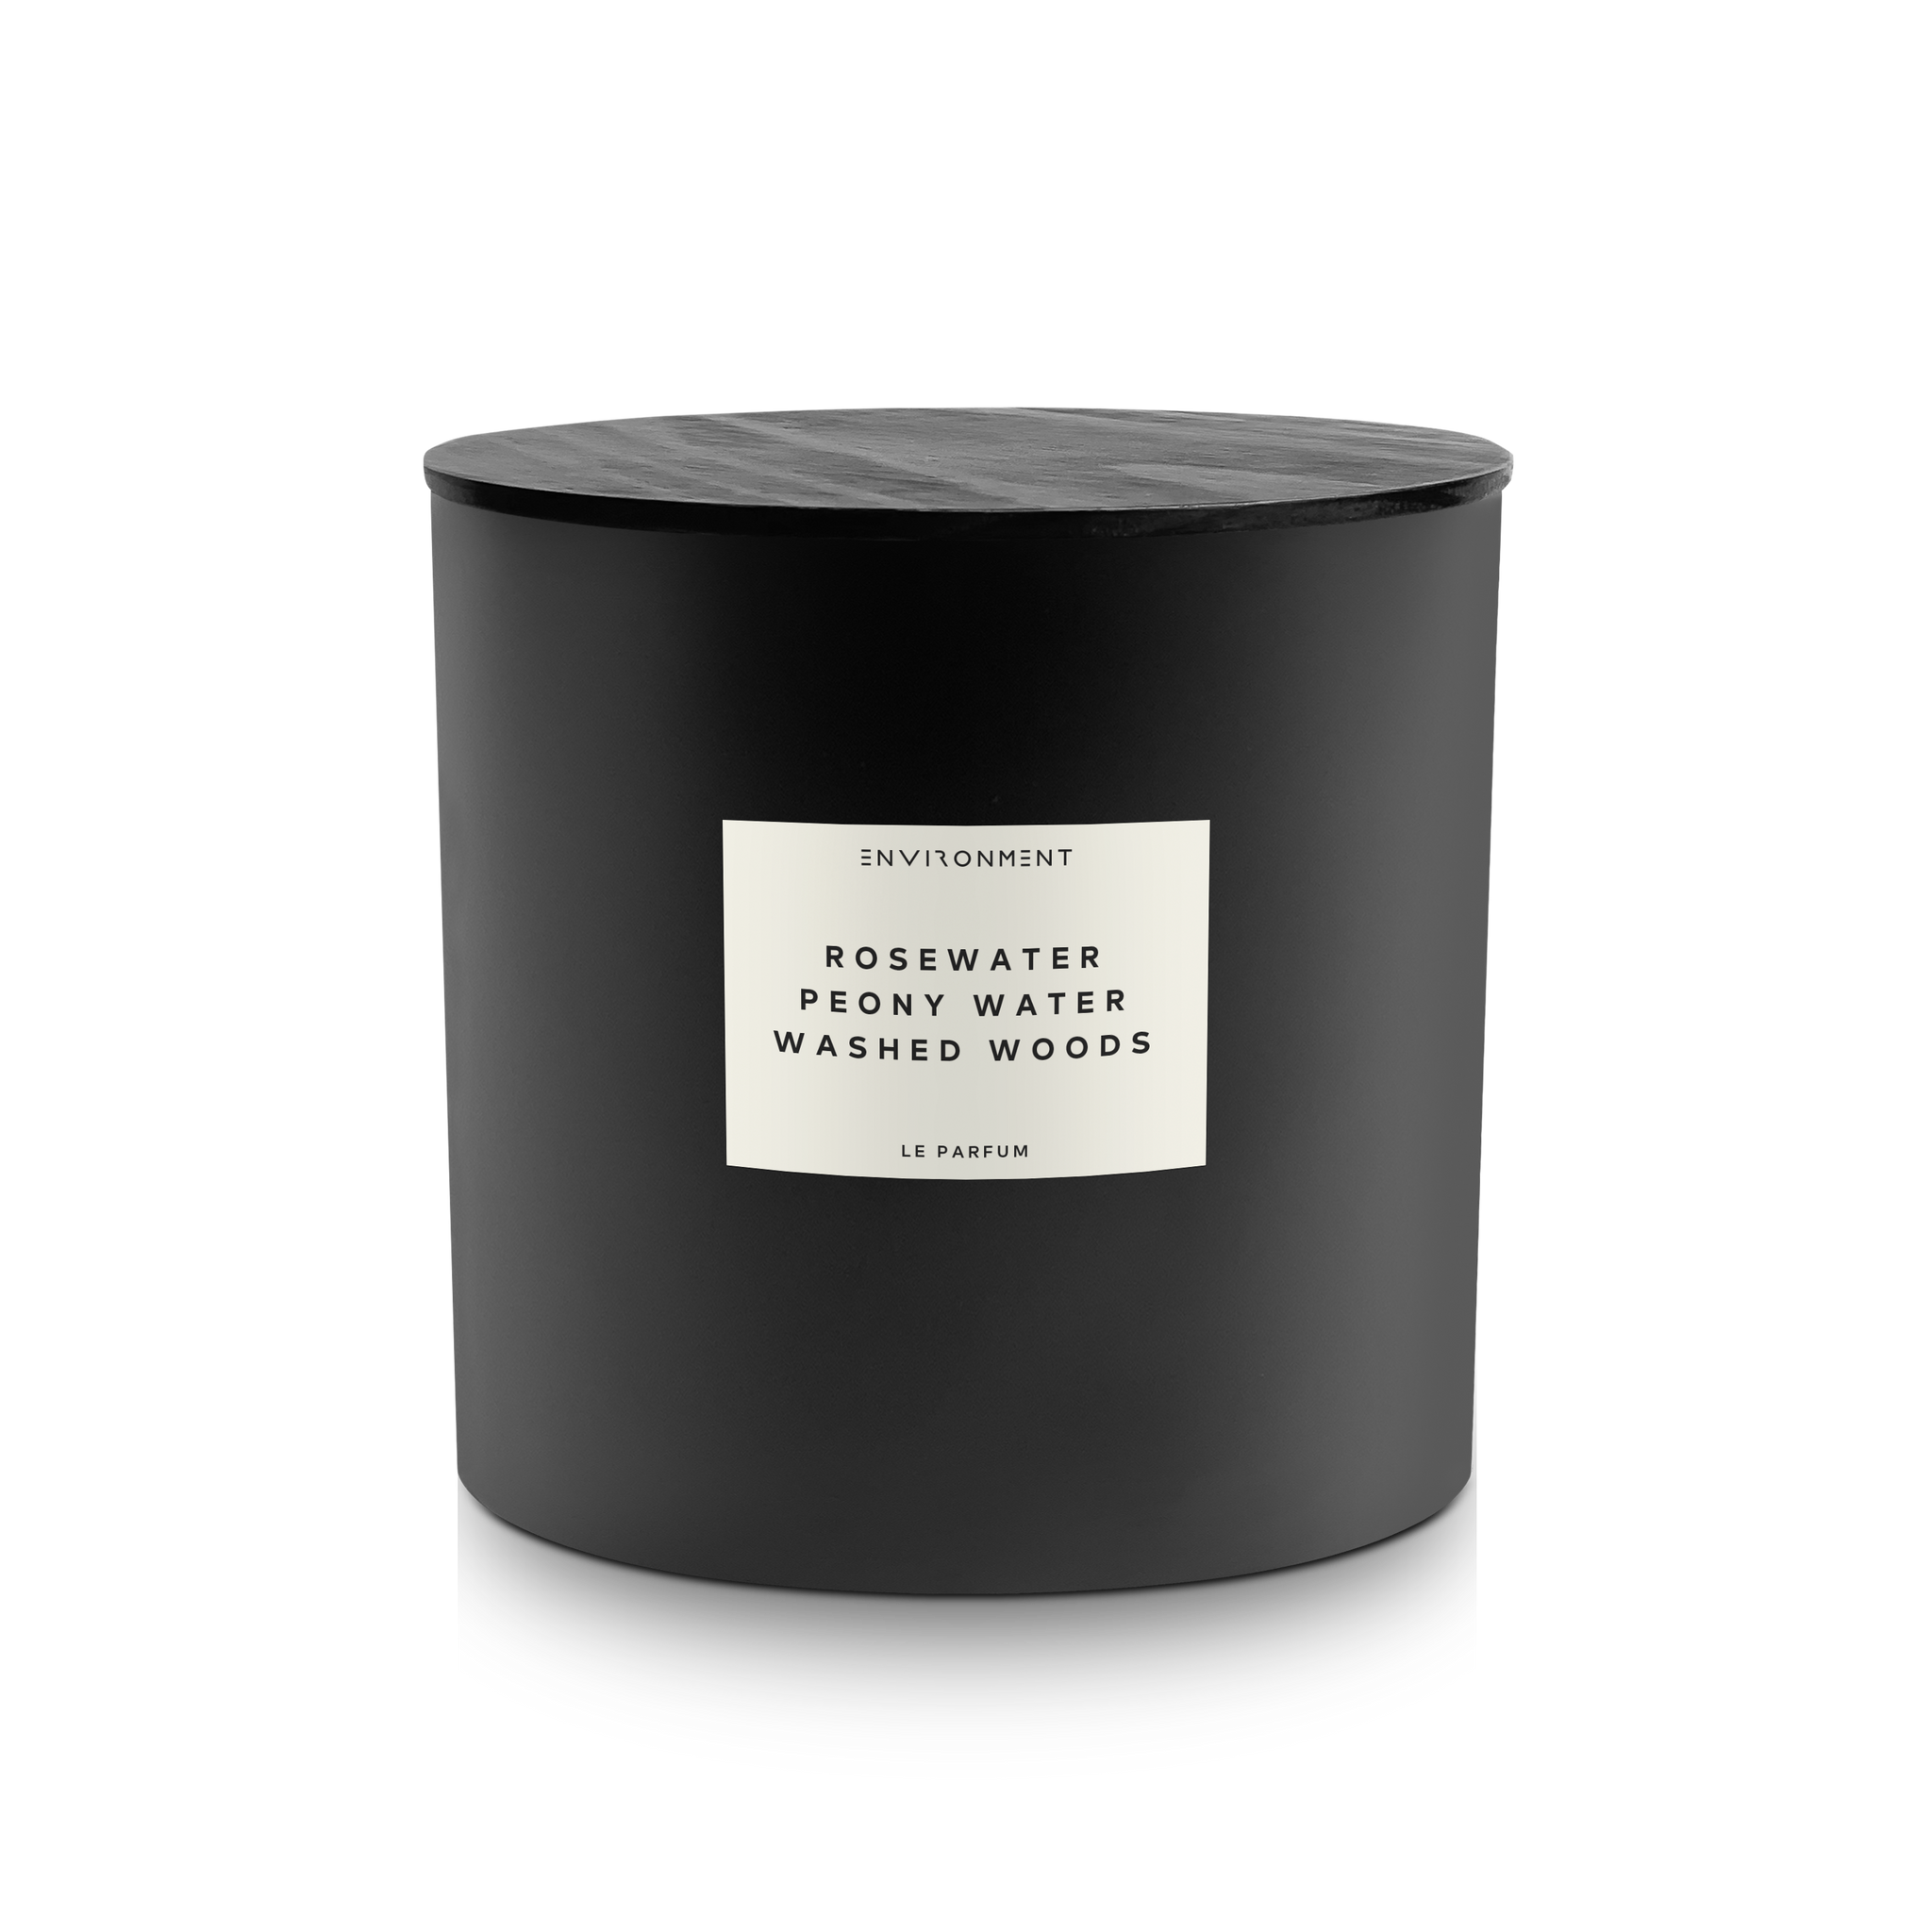 55oz Rosewater | Peony Water | Washed Woods Candle (Inspired by Issey Miyake L'Eau d'Issey®)